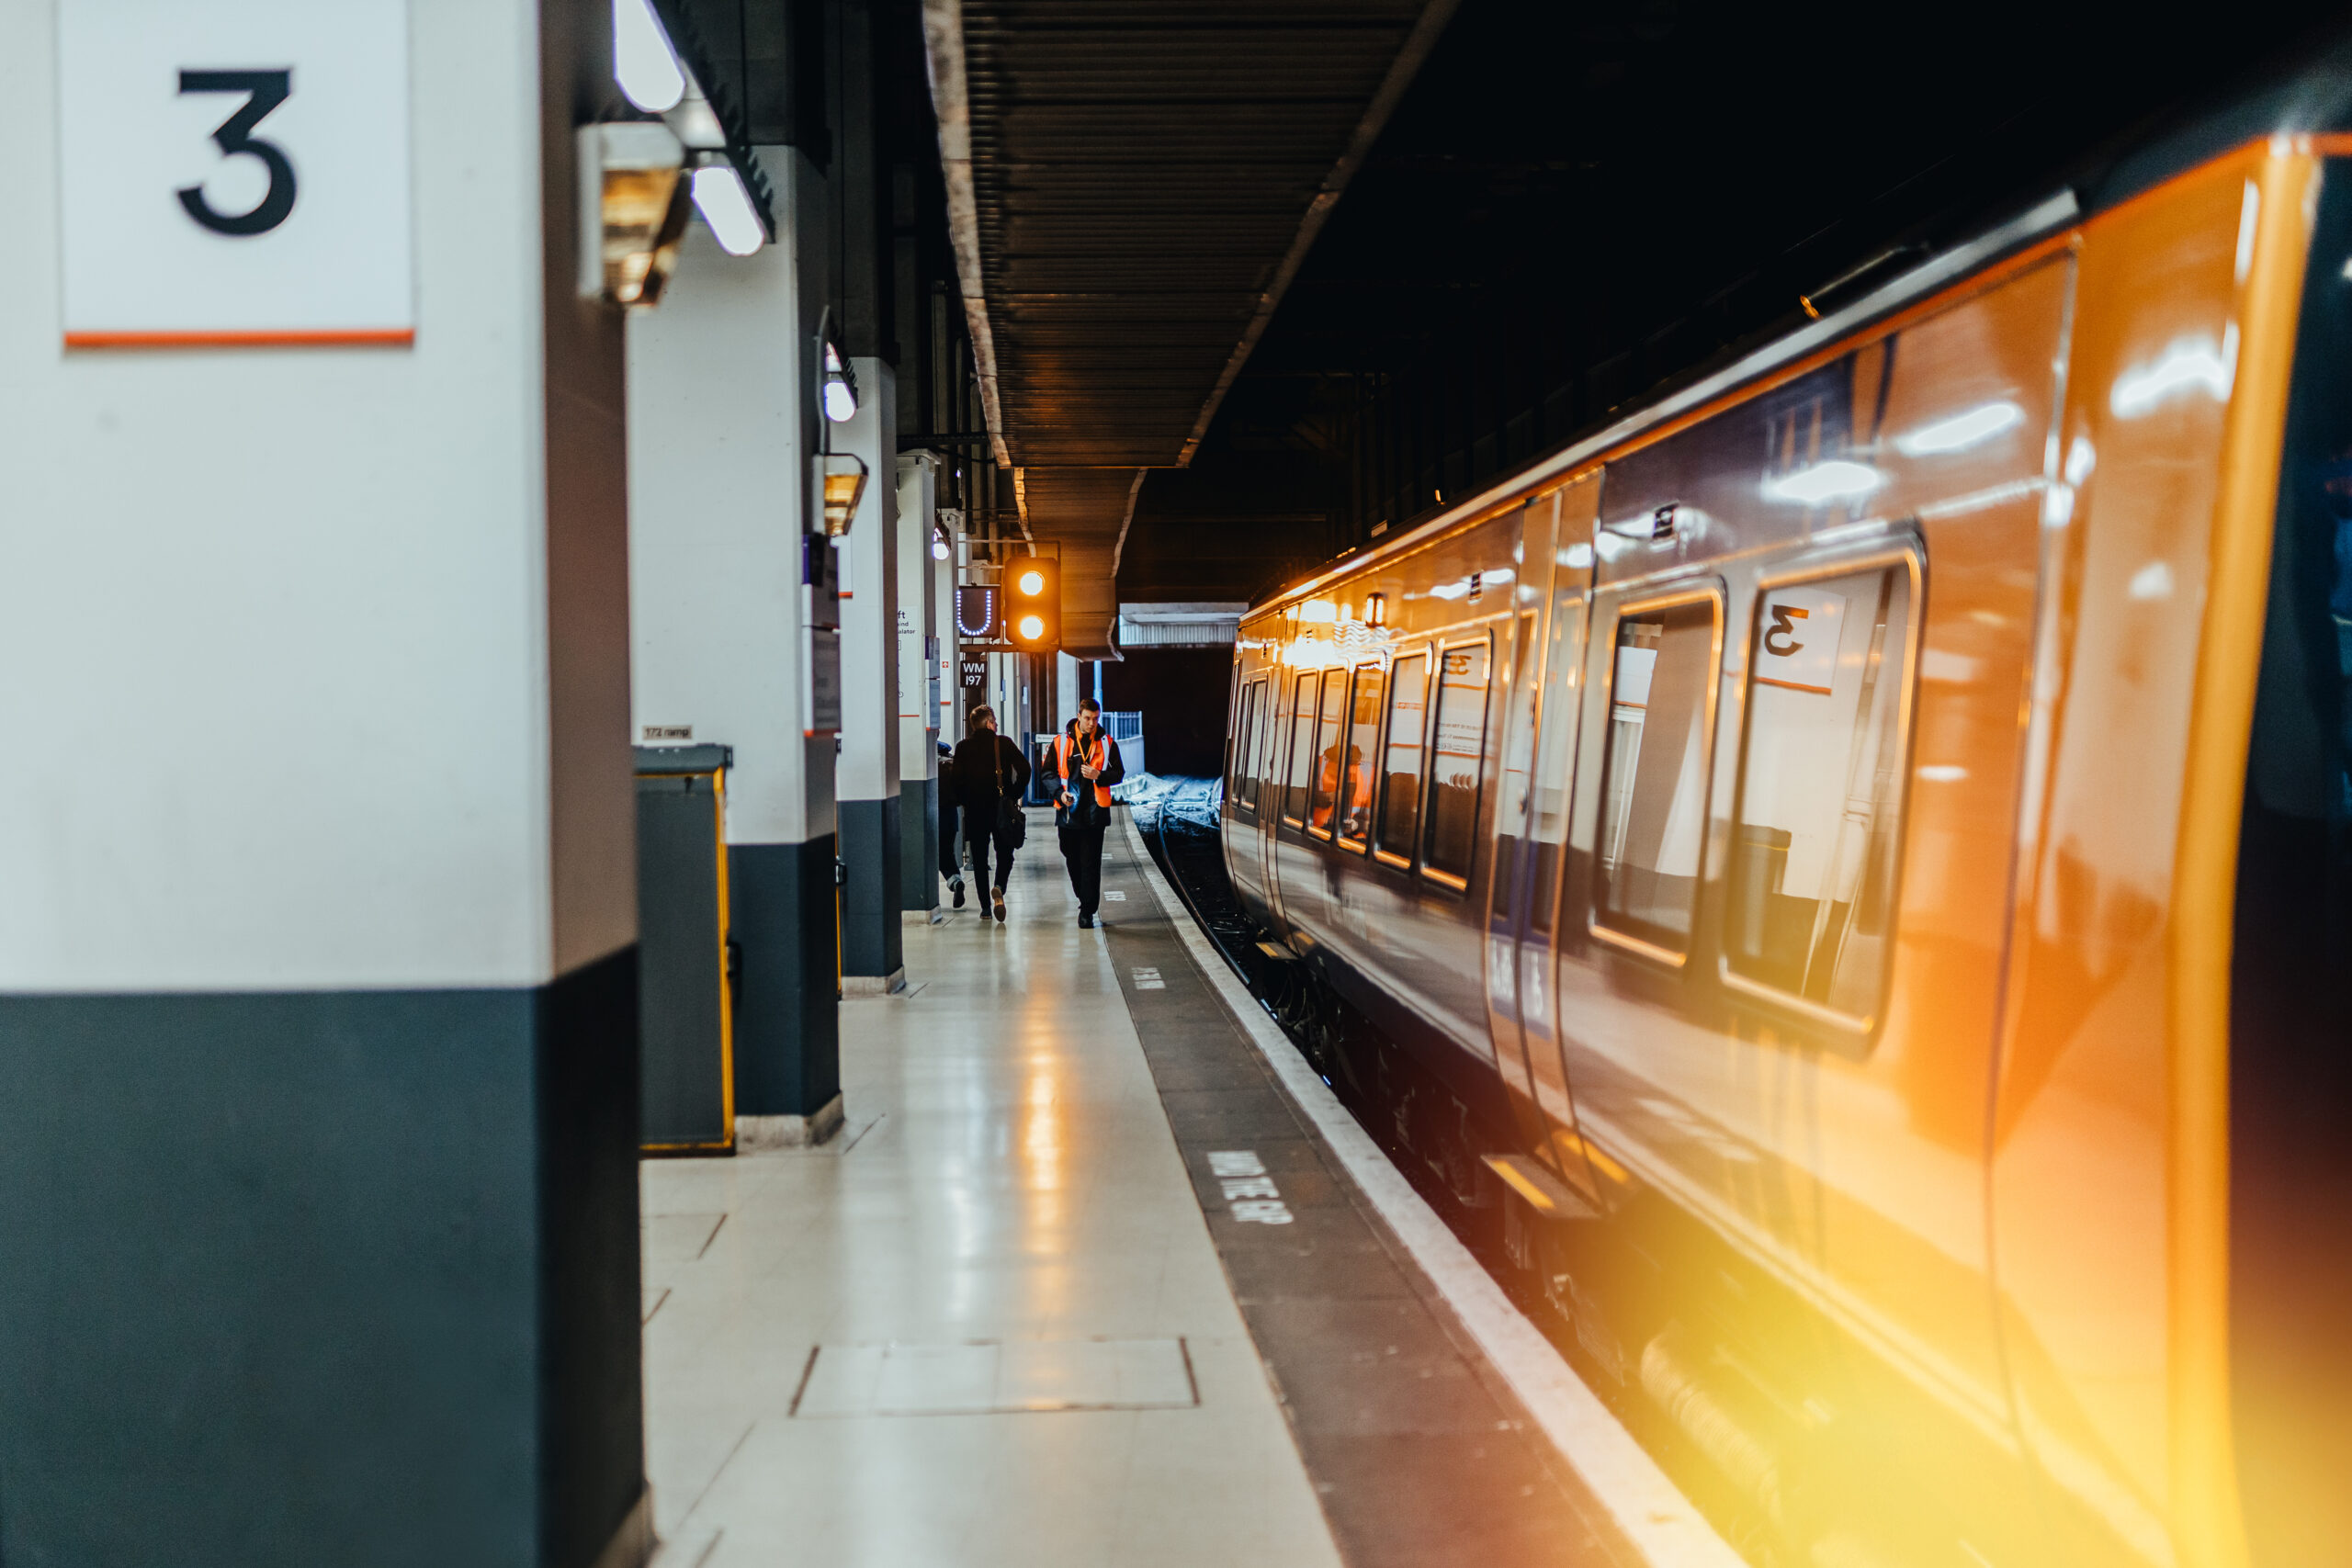 The partnership will support better integration of rail into the wider public transport and active travel network in West Midlands